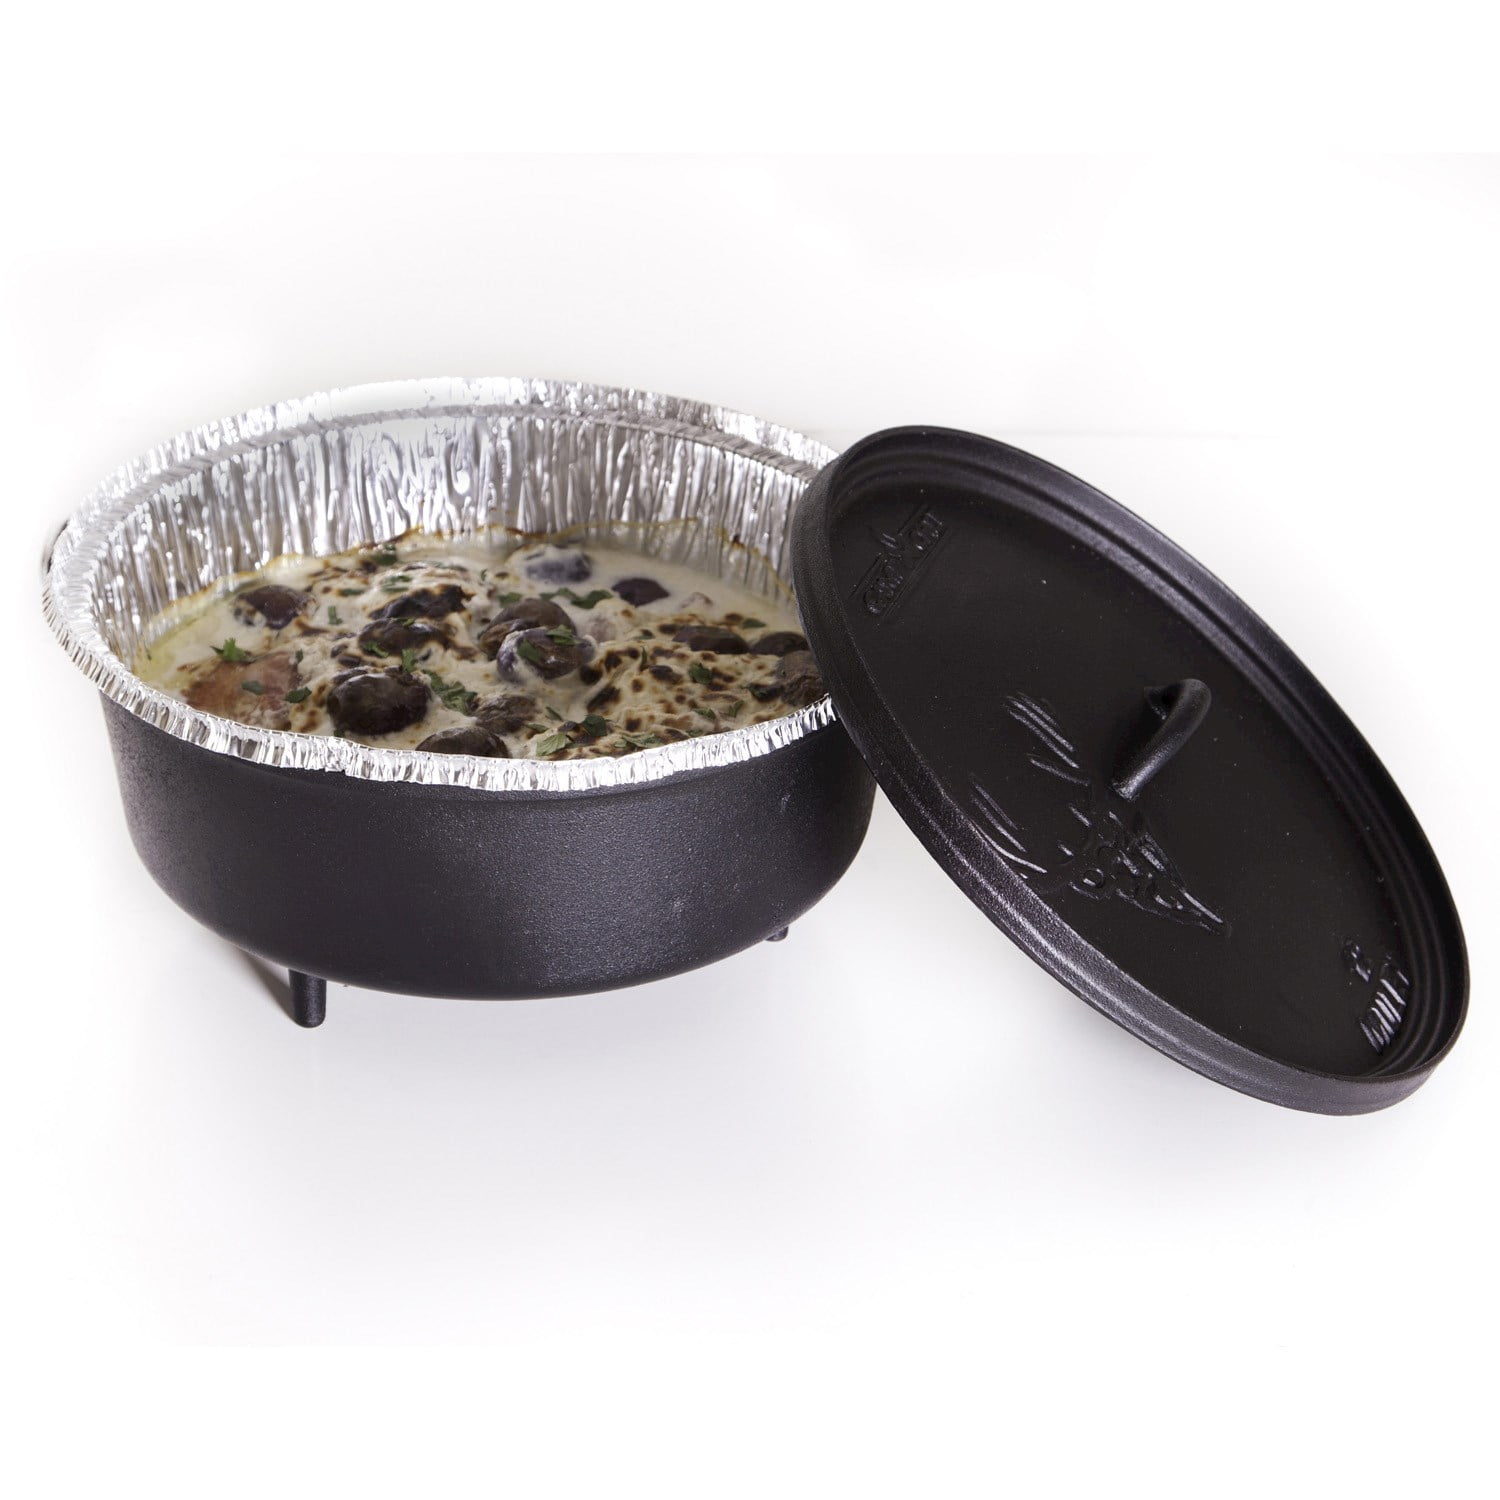 12” Disposable Dutch Oven Liners and More | Camp Chef